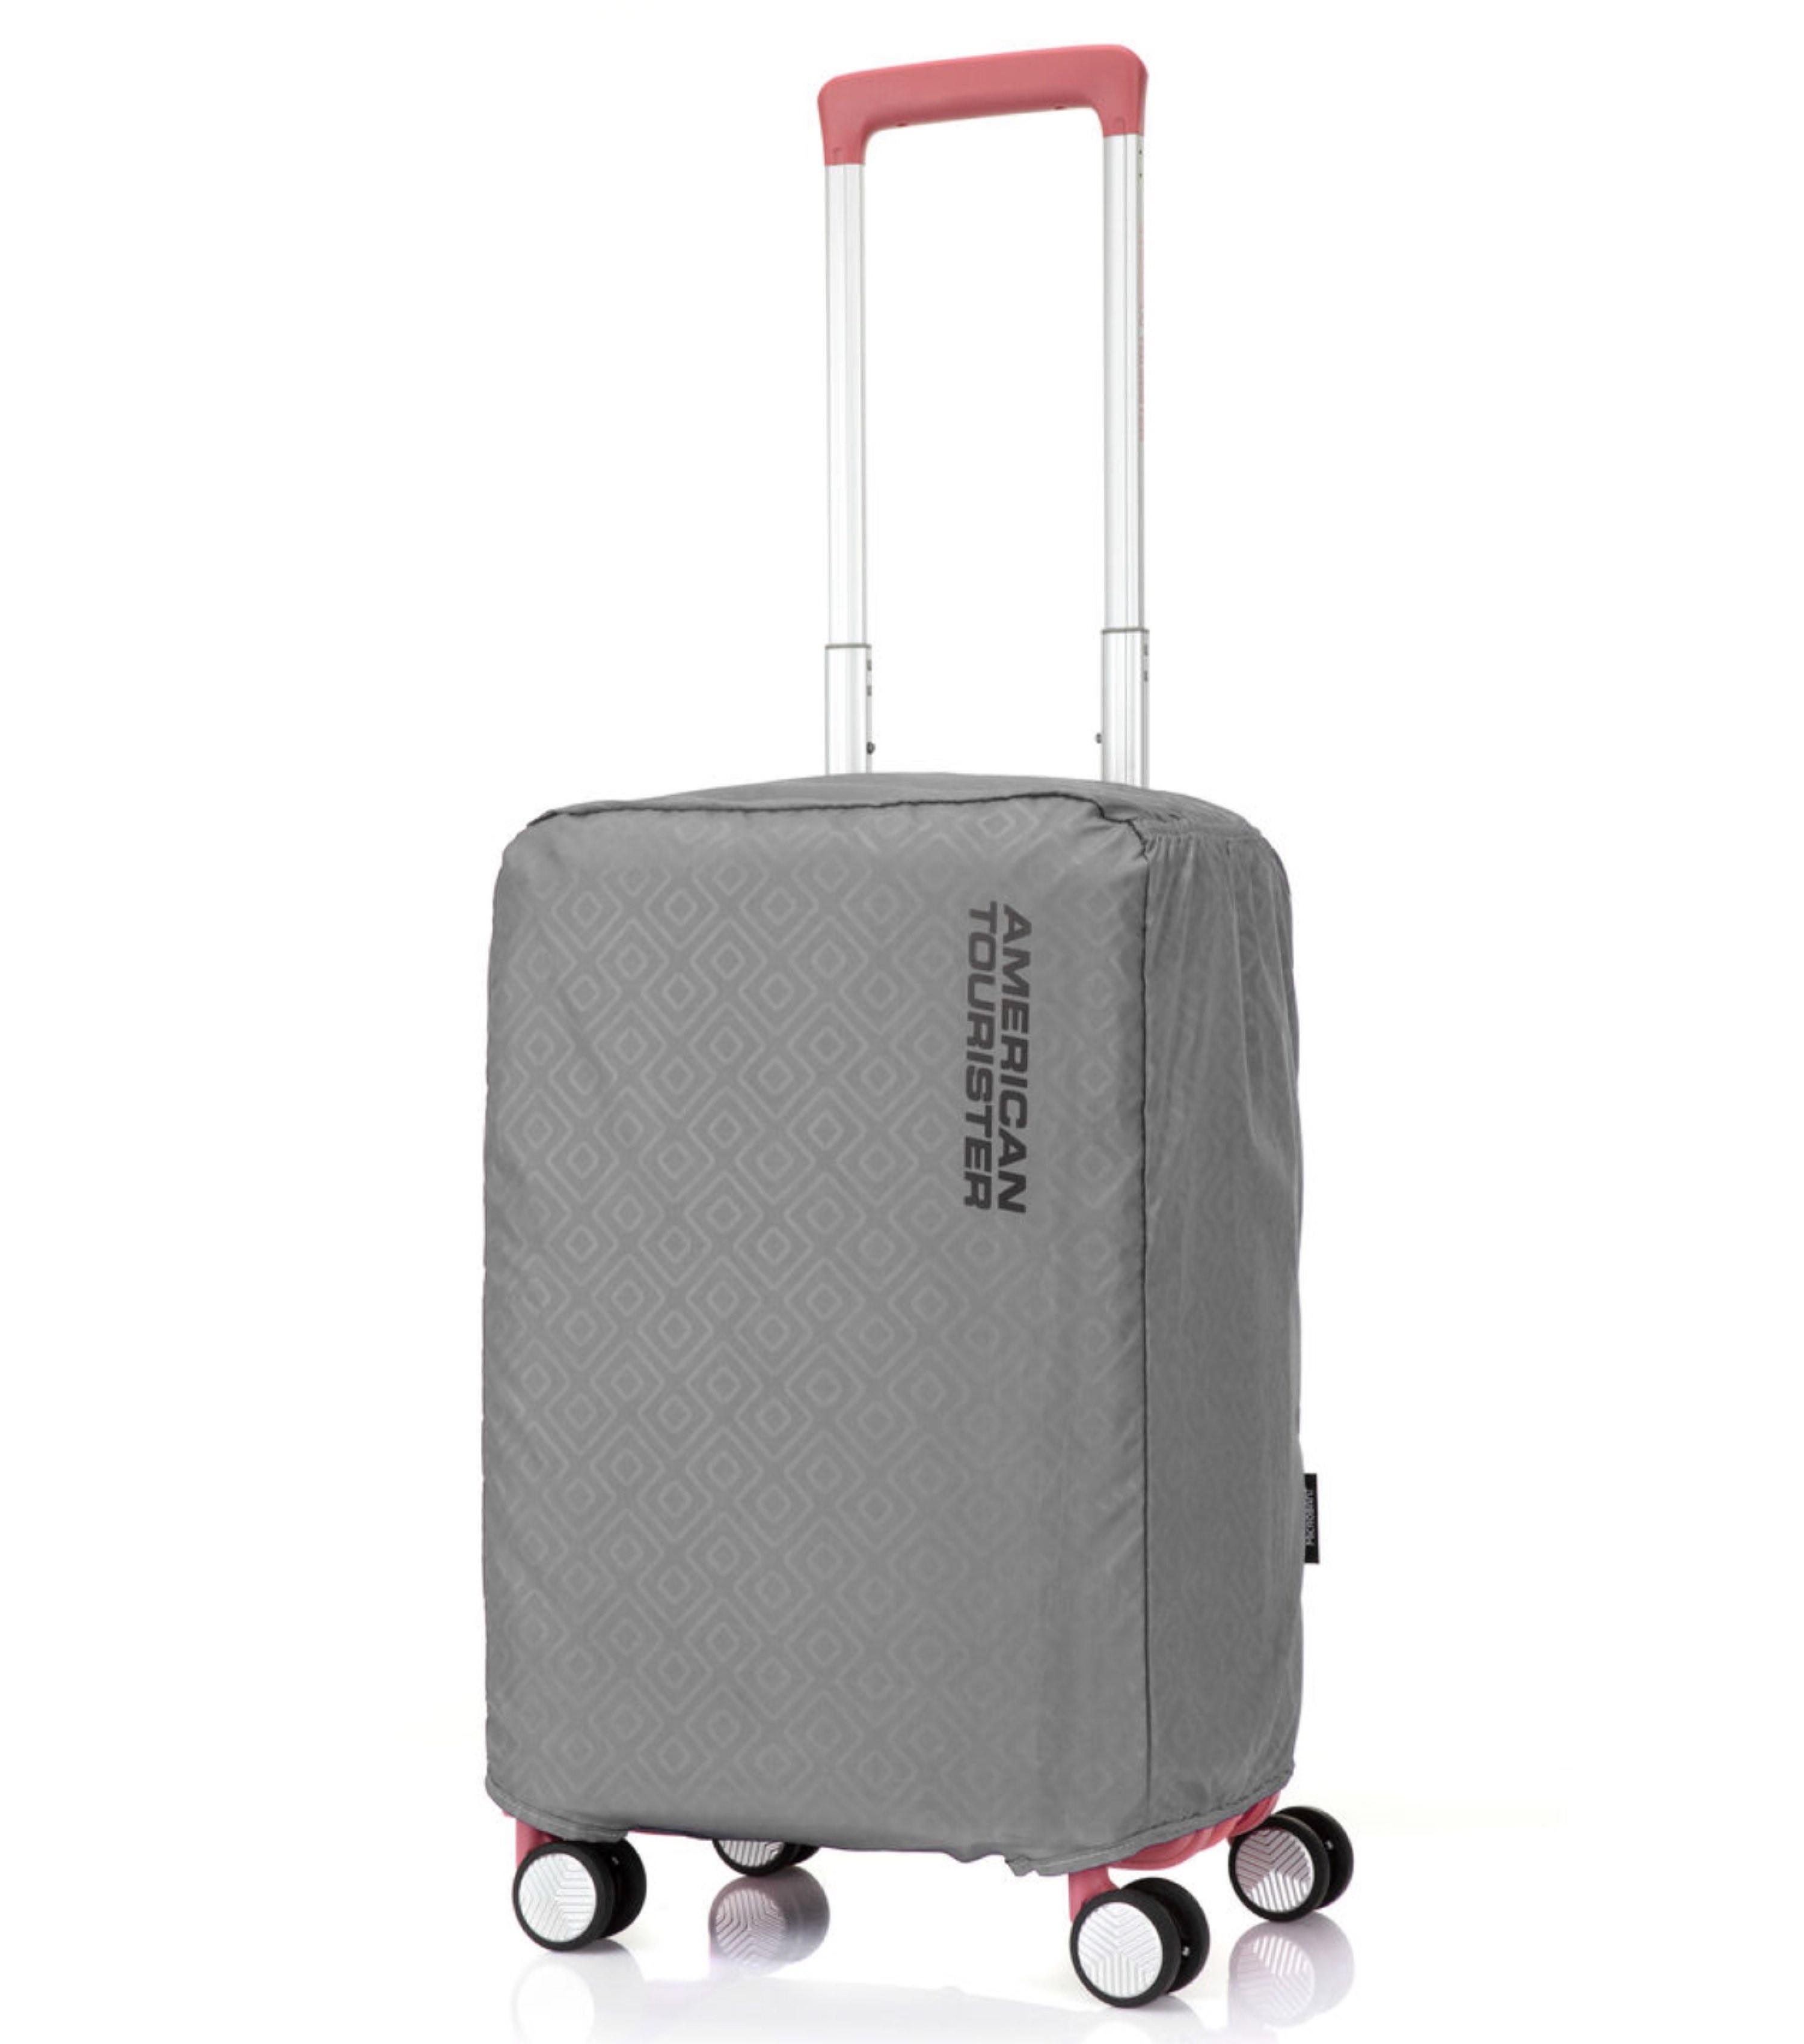 55 luggage cover